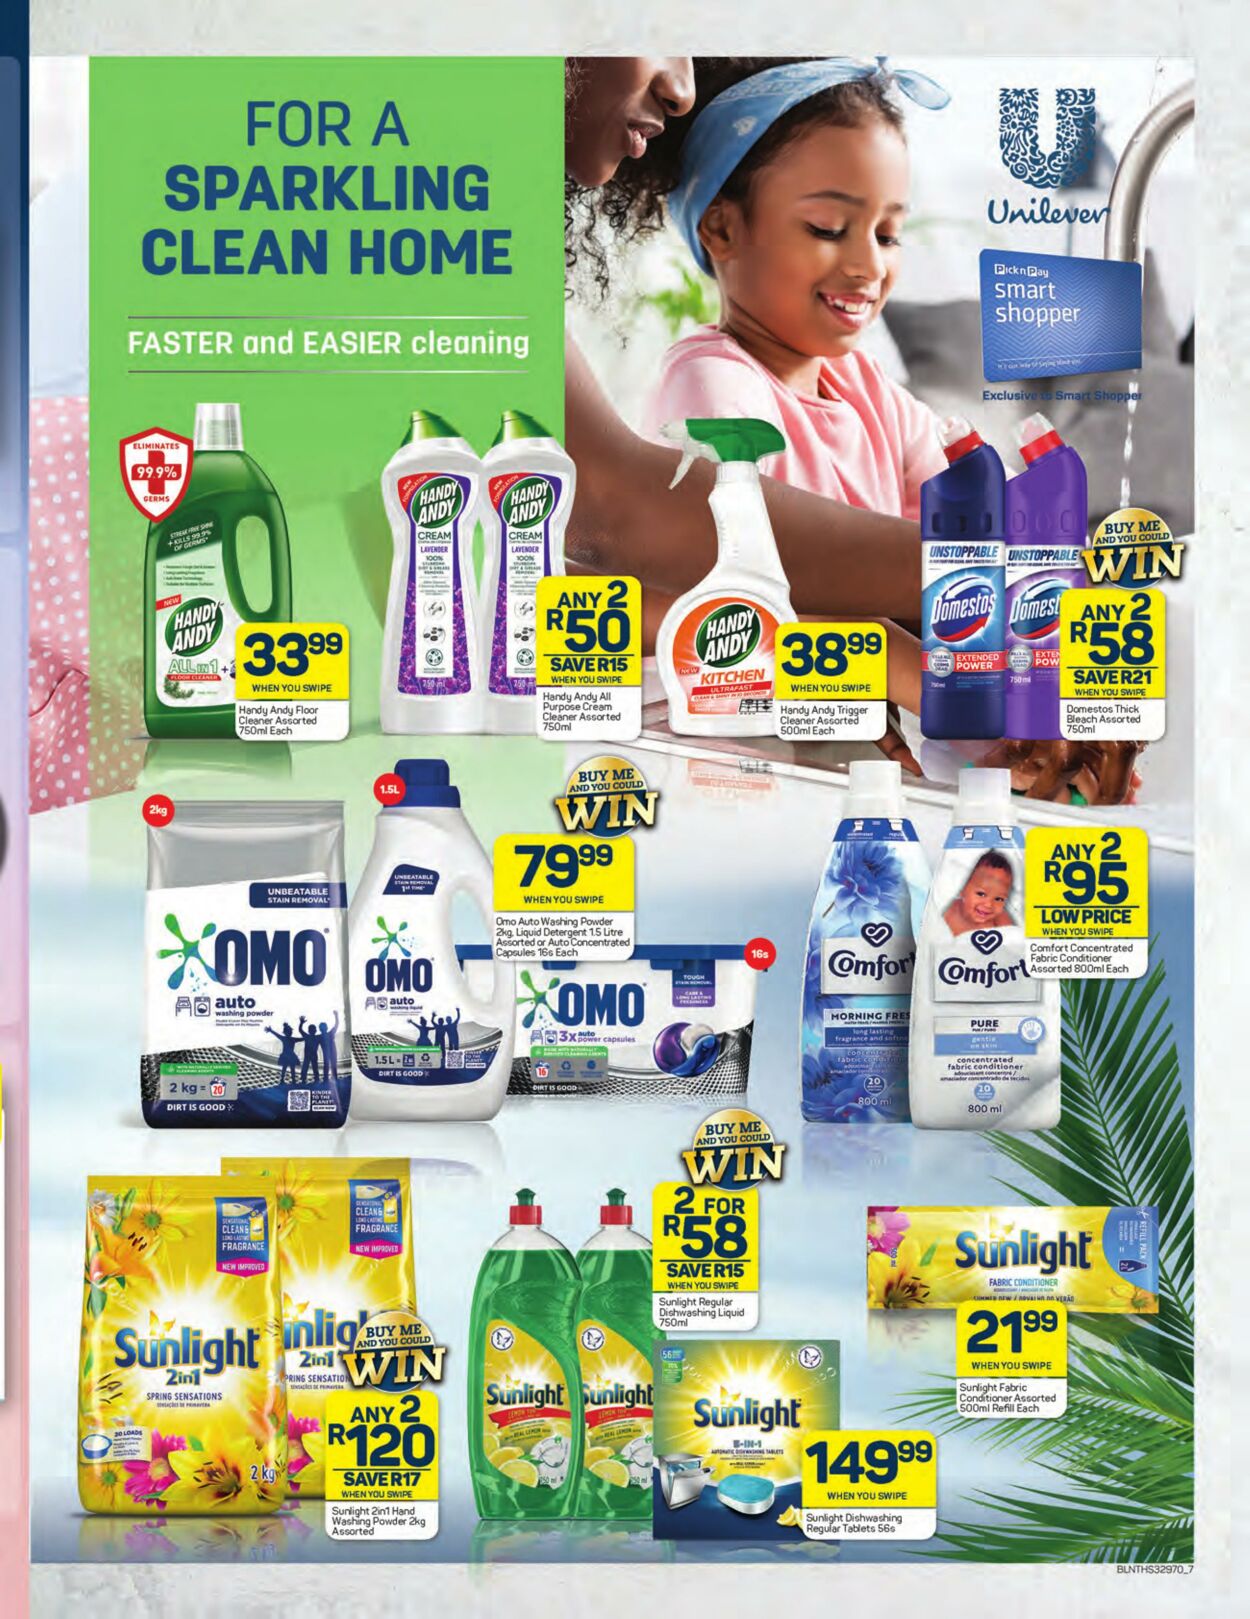 Special Pick n Pay 25.05.2023 - 04.06.2023